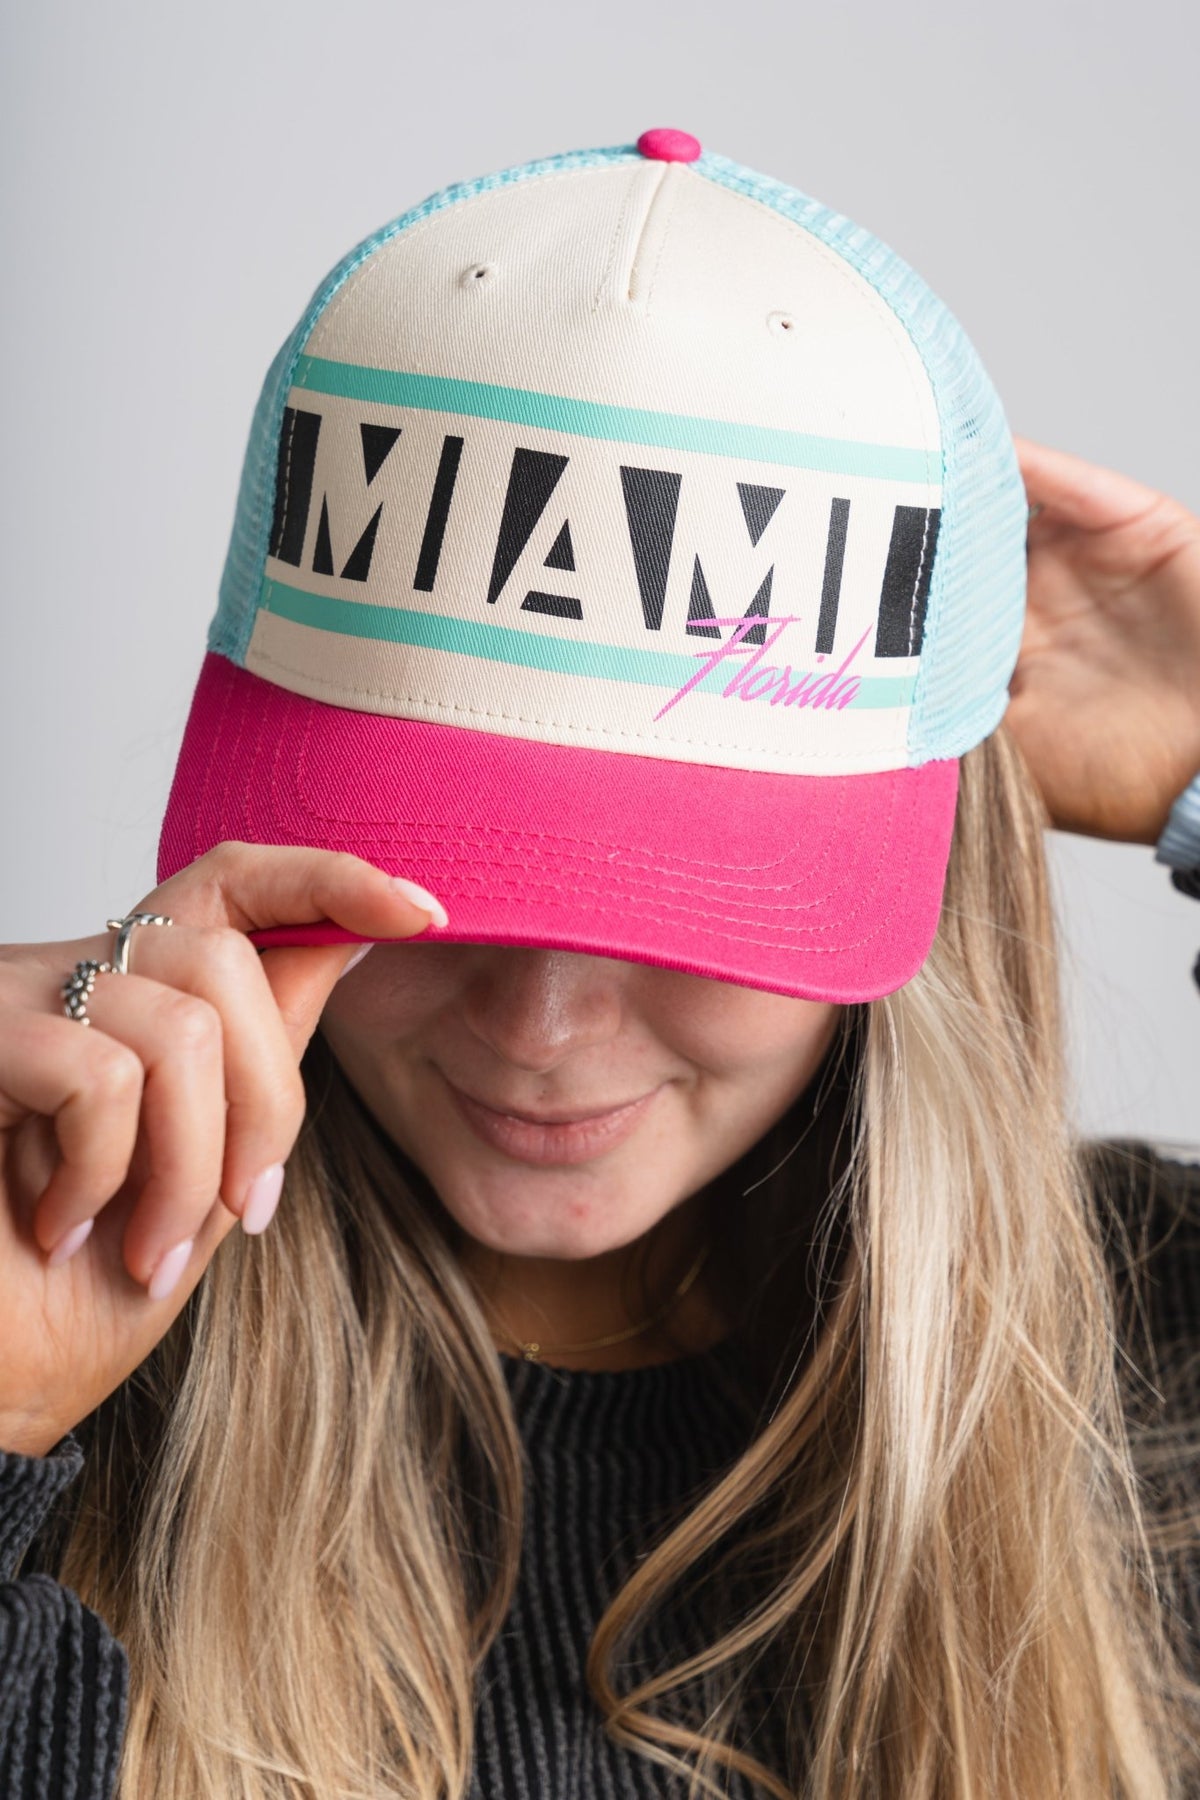 Miami sinclair hat pink/aqua - Trendy Gifts at Lush Fashion Lounge Boutique in Oklahoma City